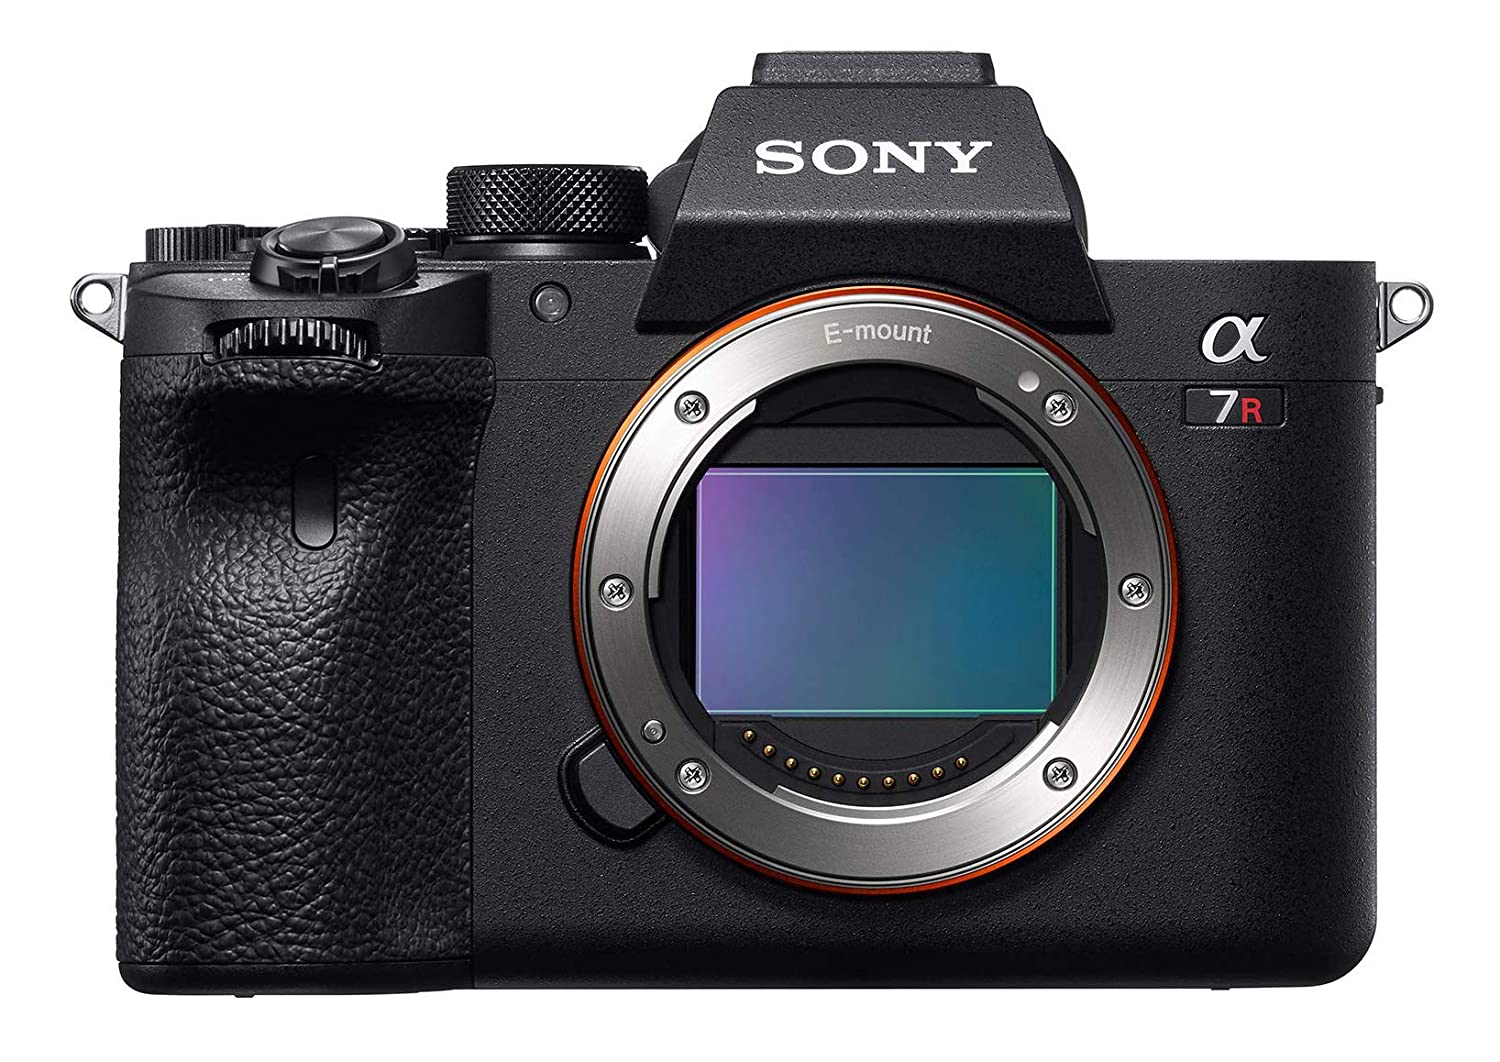 Sony α7R IV 35 mm Full-Frame Mirrorless Camera with 61.0 MP ILCE-7RM4